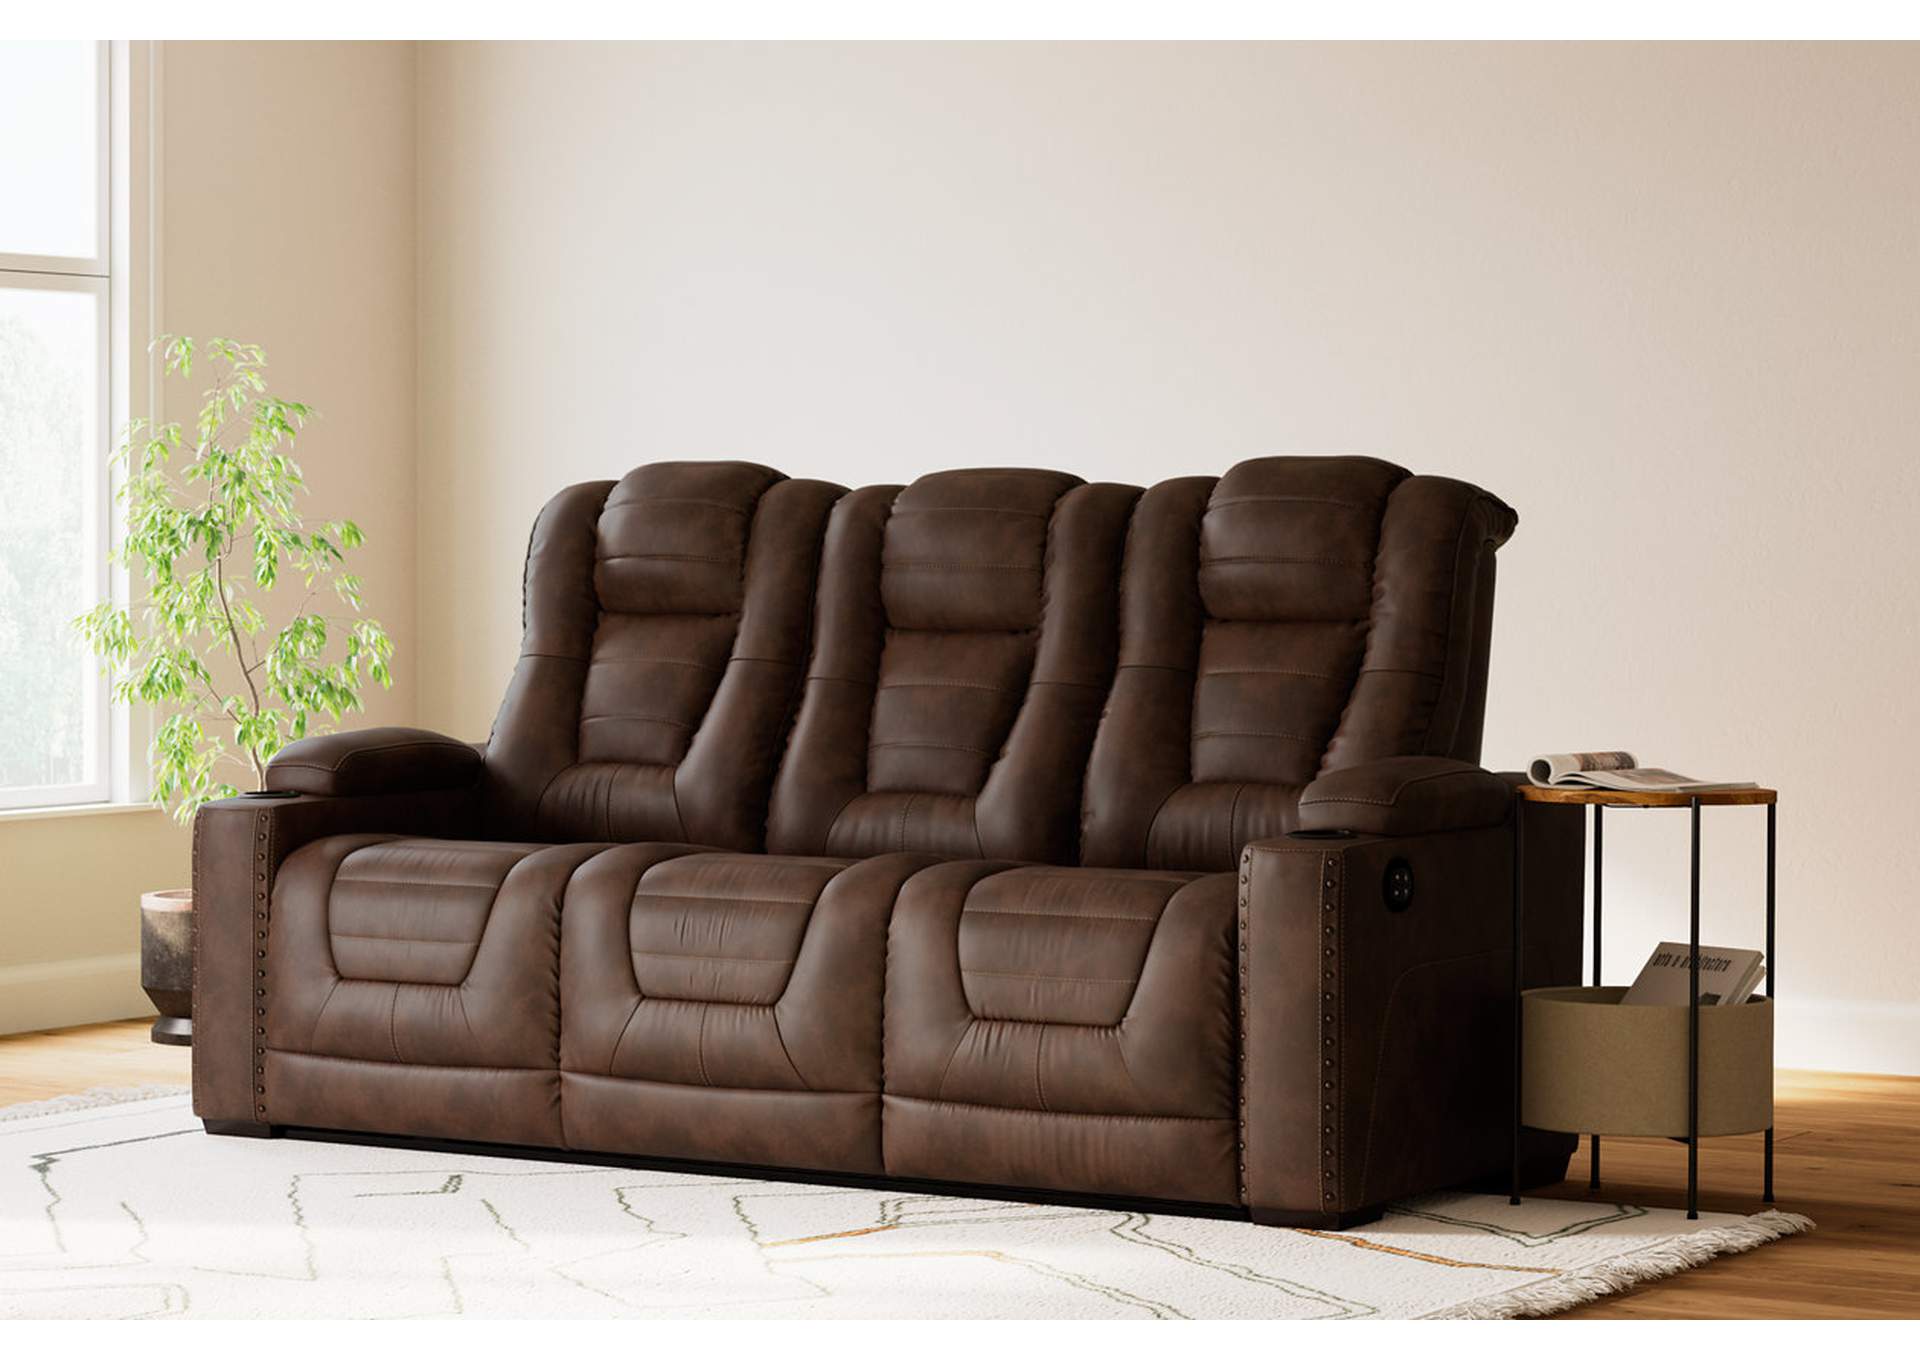 Owner's Box Power Reclining Sofa,Signature Design By Ashley